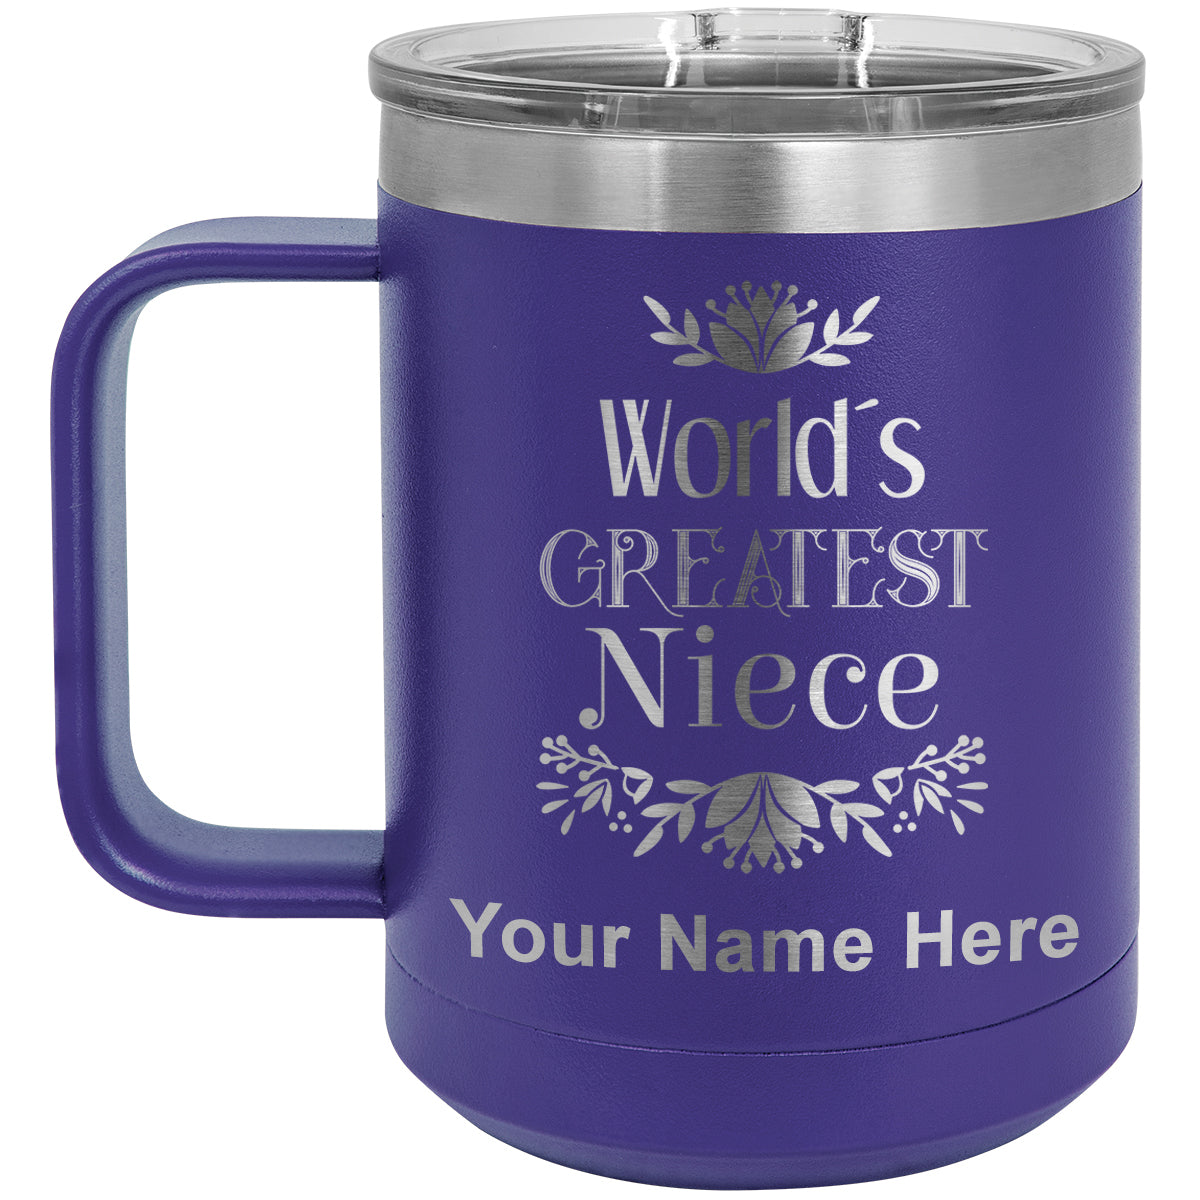 15oz Vacuum Insulated Coffee Mug, World's Greatest Niece, Personalized Engraving Included